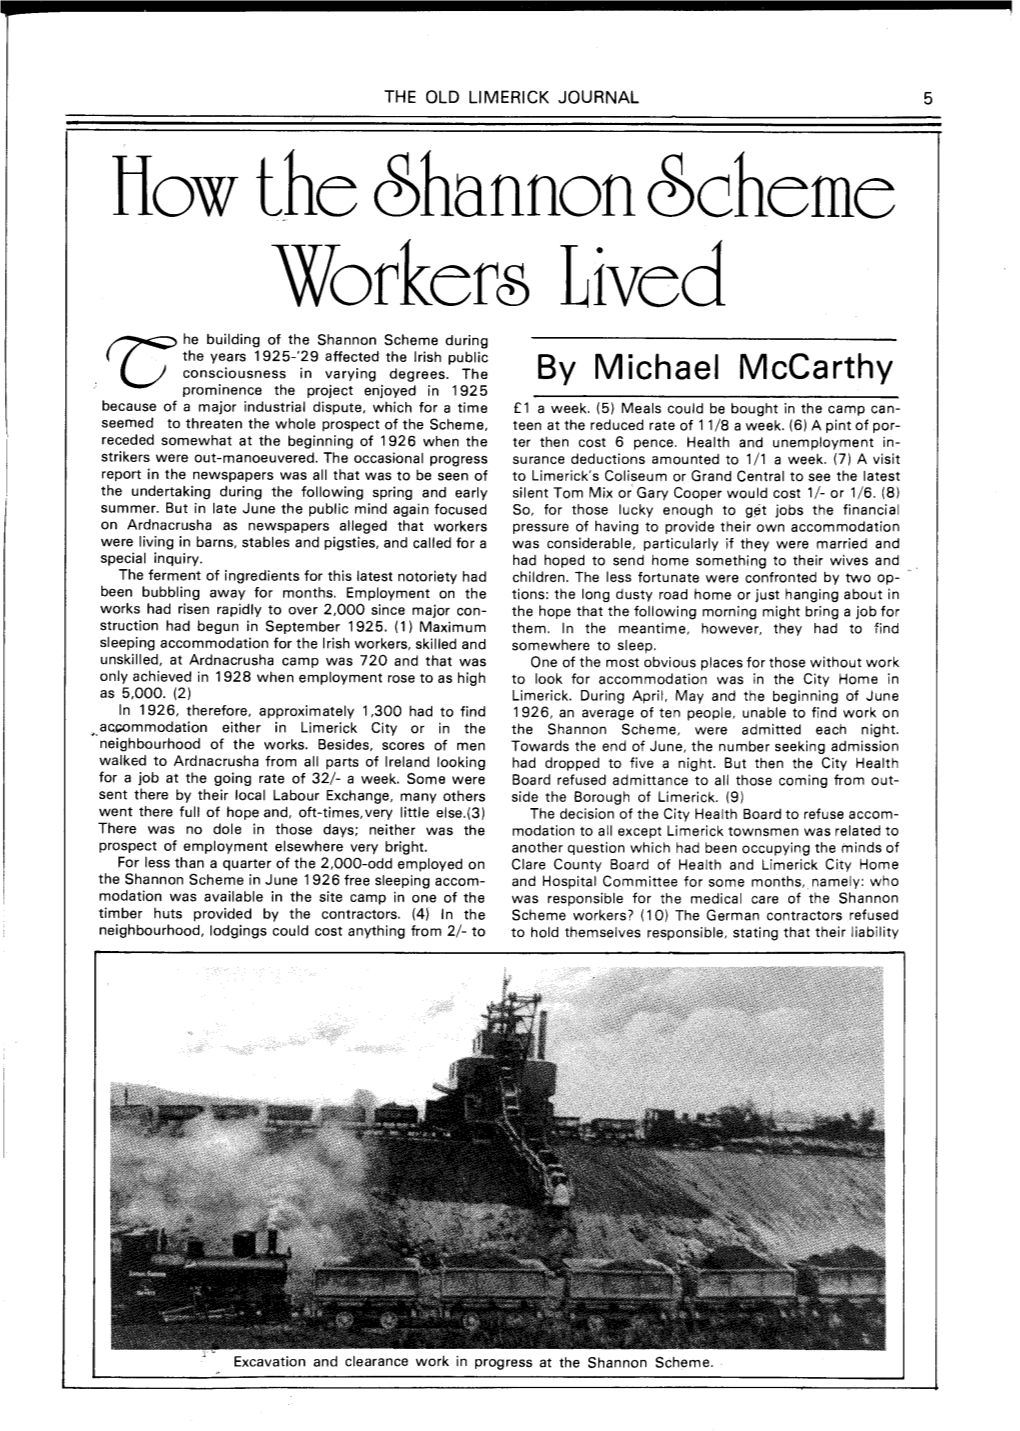 How the Shannon Scheme Workers Lived by Michael Mccarthy